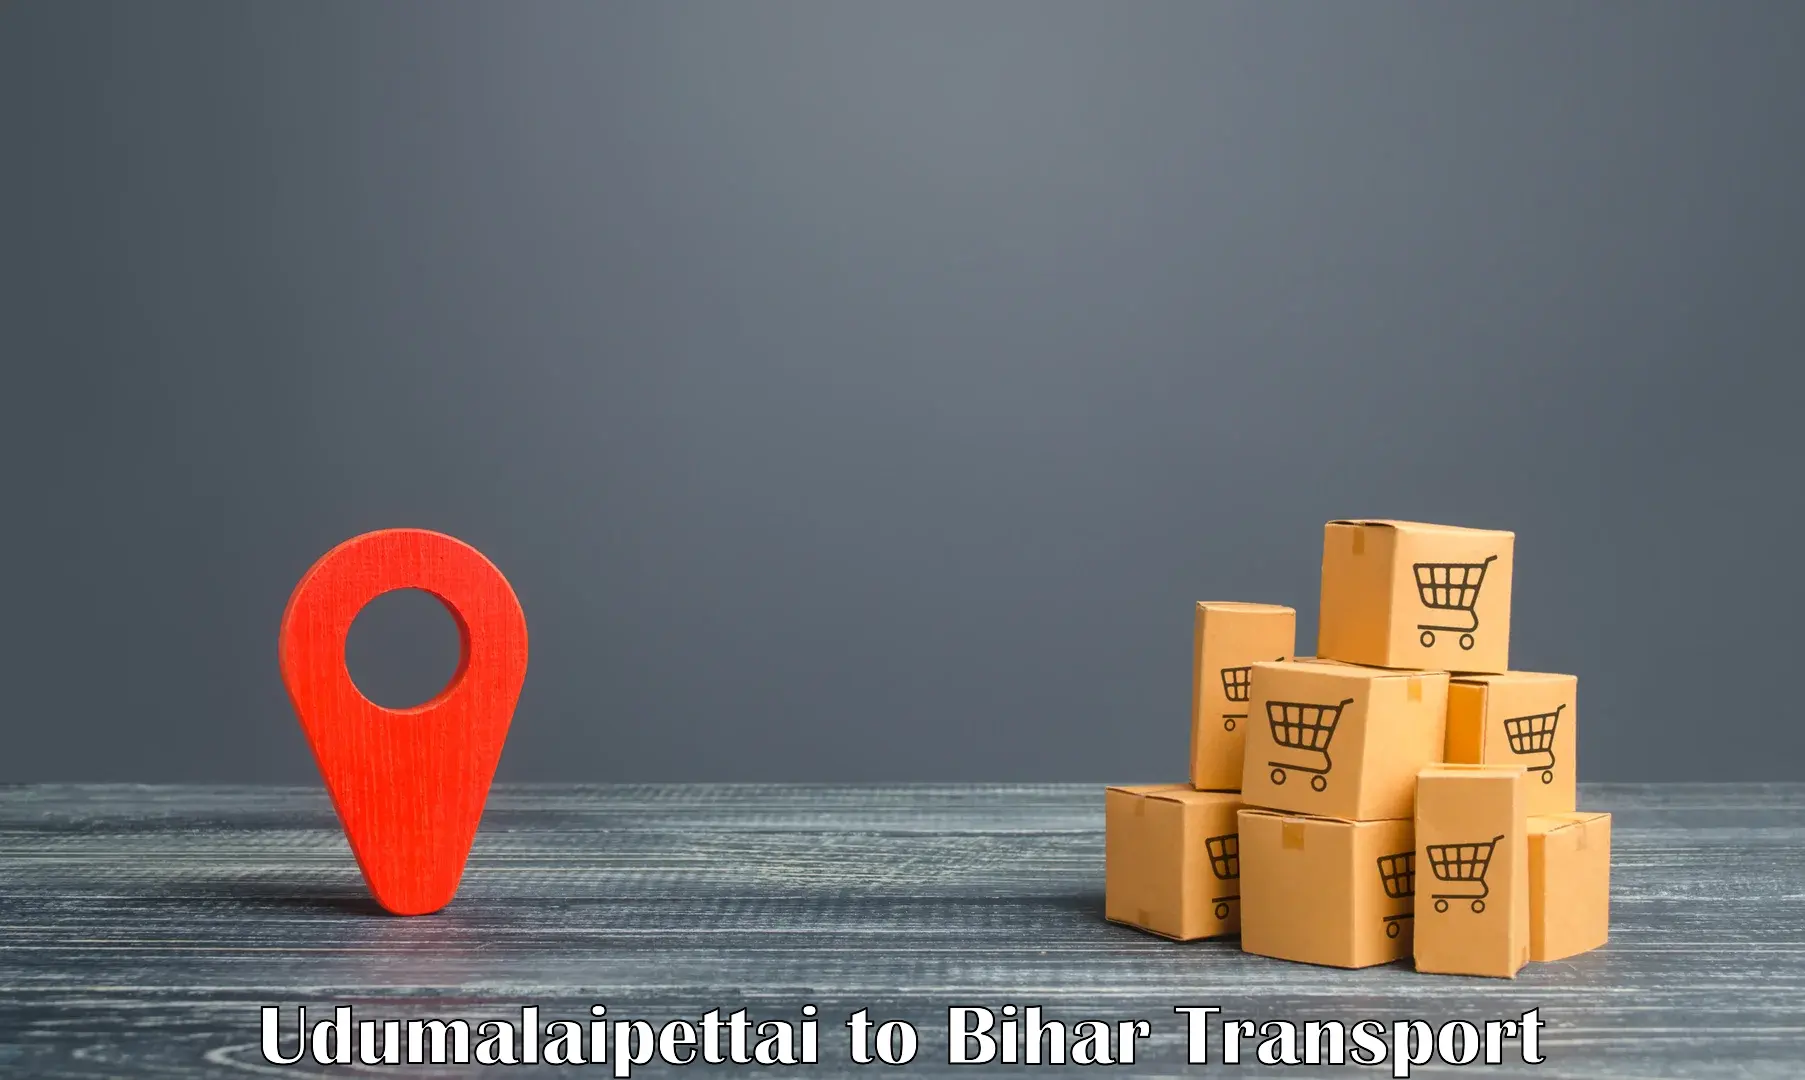 Commercial transport service Udumalaipettai to Fatwah